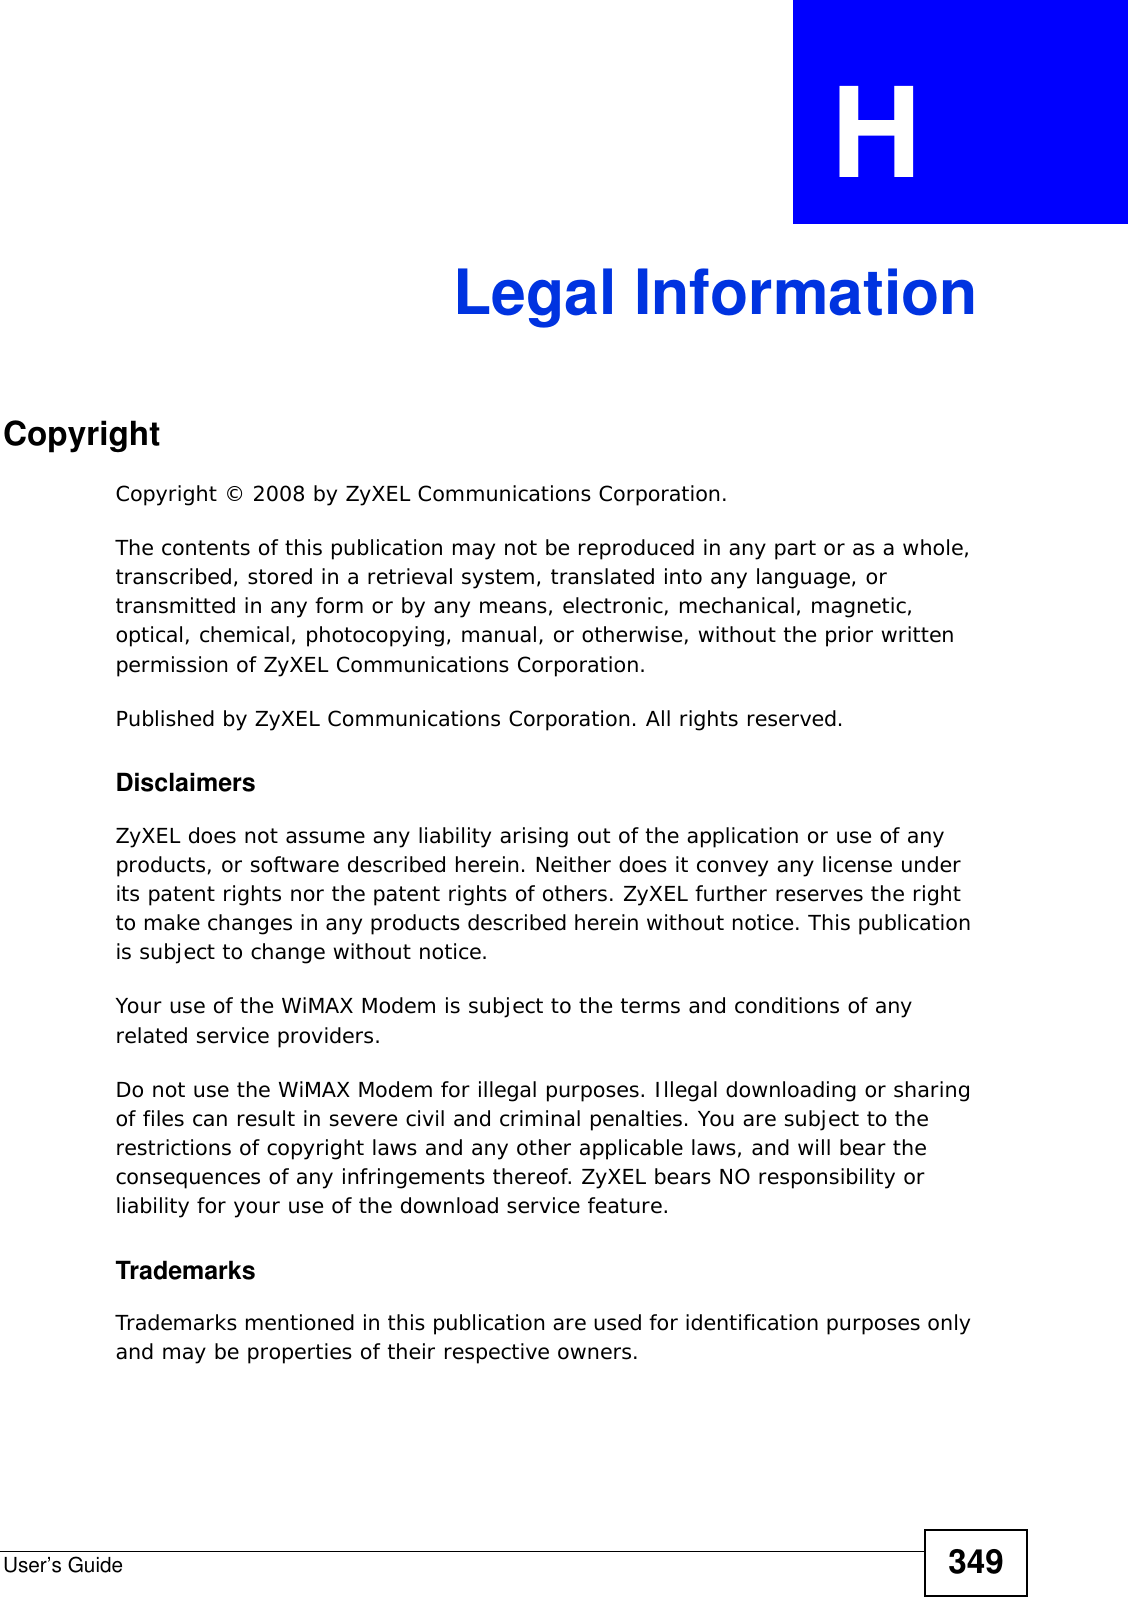 User’s Guide 349APPENDIX  H Legal InformationCopyrightCopyright © 2008 by ZyXEL Communications Corporation.The contents of this publication may not be reproduced in any part or as a whole, transcribed, stored in a retrieval system, translated into any language, or transmitted in any form or by any means, electronic, mechanical, magnetic, optical, chemical, photocopying, manual, or otherwise, without the prior written permission of ZyXEL Communications Corporation.Published by ZyXEL Communications Corporation. All rights reserved.DisclaimersZyXEL does not assume any liability arising out of the application or use of any products, or software described herein. Neither does it convey any license under its patent rights nor the patent rights of others. ZyXEL further reserves the right to make changes in any products described herein without notice. This publication is subject to change without notice.Your use of the WiMAX Modem is subject to the terms and conditions of any related service providers.Do not use the WiMAX Modem for illegal purposes. Illegal downloading or sharing of files can result in severe civil and criminal penalties. You are subject to the restrictions of copyright laws and any other applicable laws, and will bear the consequences of any infringements thereof. ZyXEL bears NO responsibility or liability for your use of the download service feature.TrademarksTrademarks mentioned in this publication are used for identification purposes only and may be properties of their respective owners.